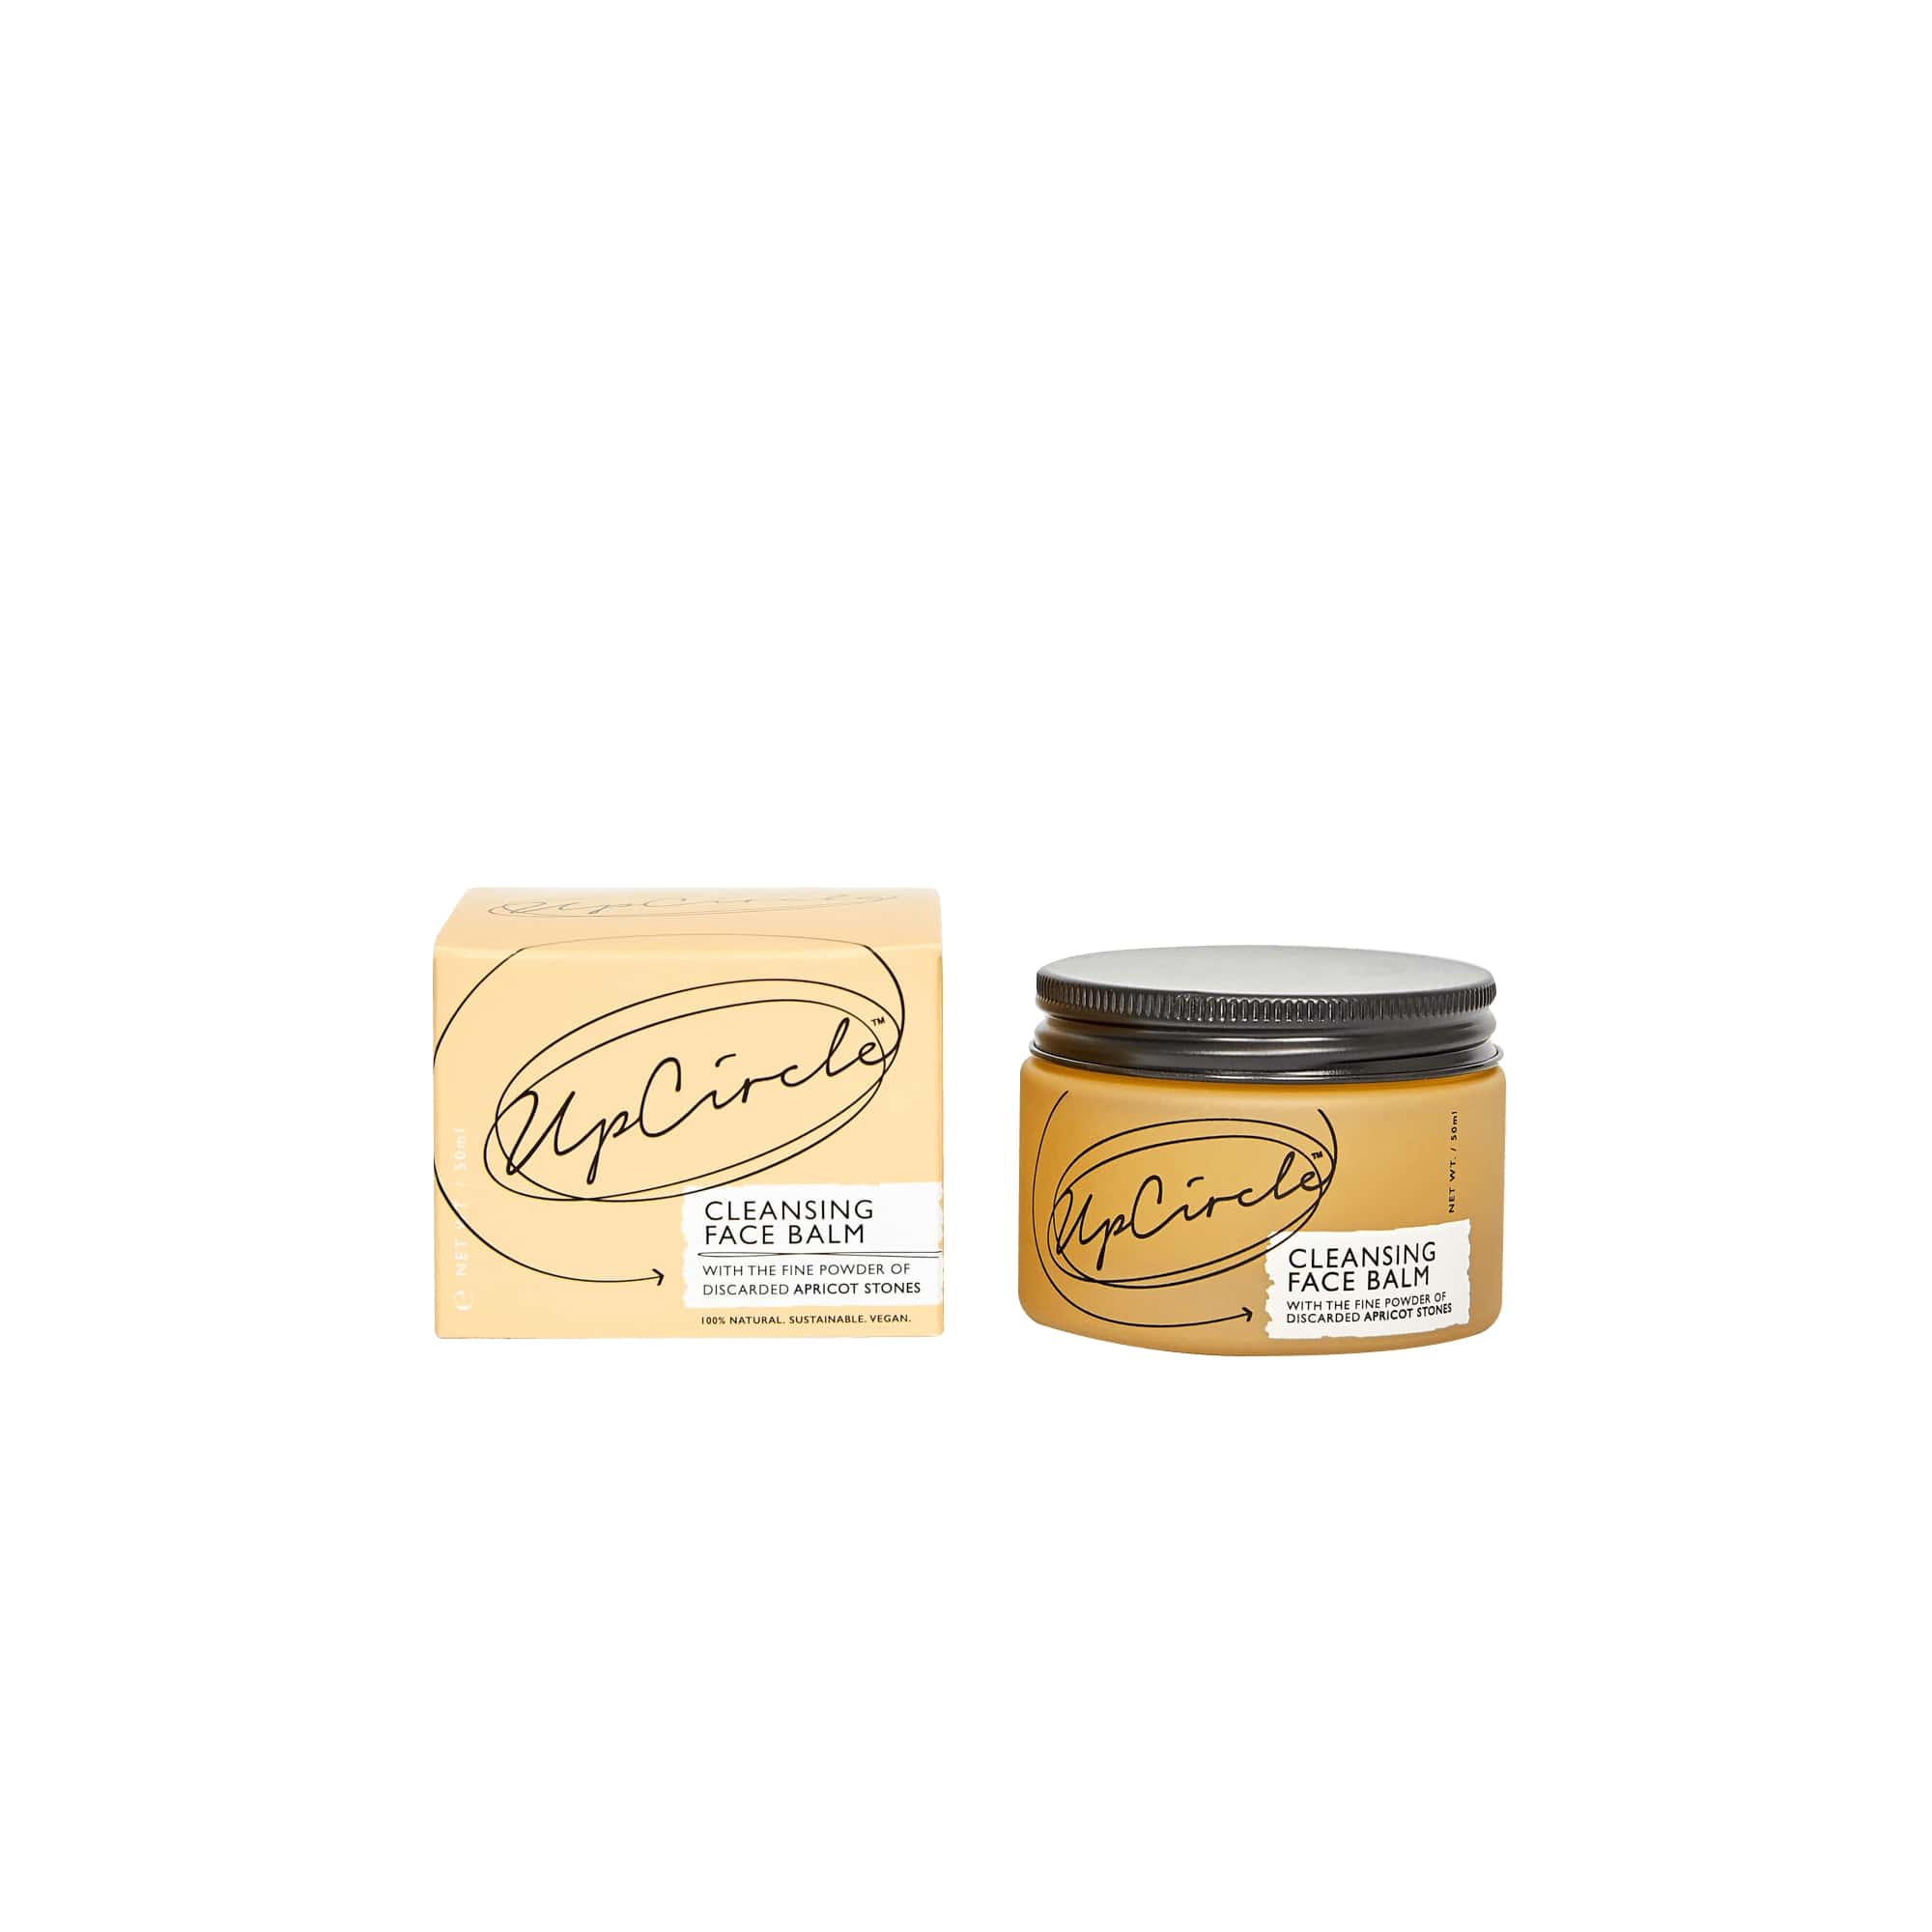 Apricot Cleansing Face Balm